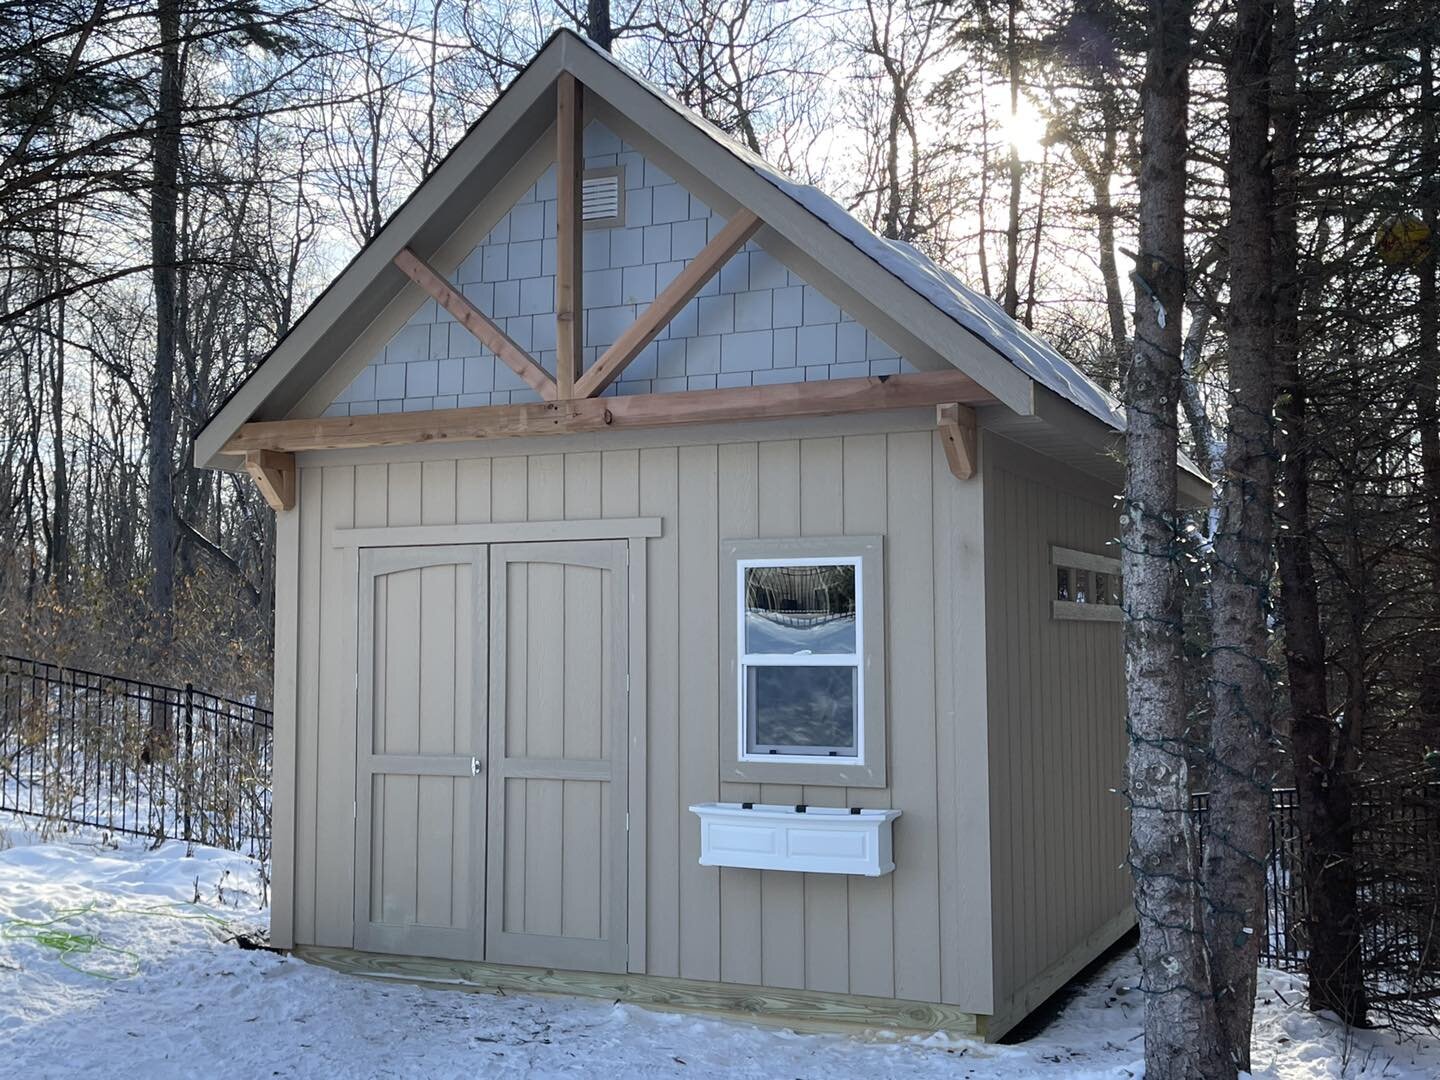 12x14 Storage shed/playhouse combo